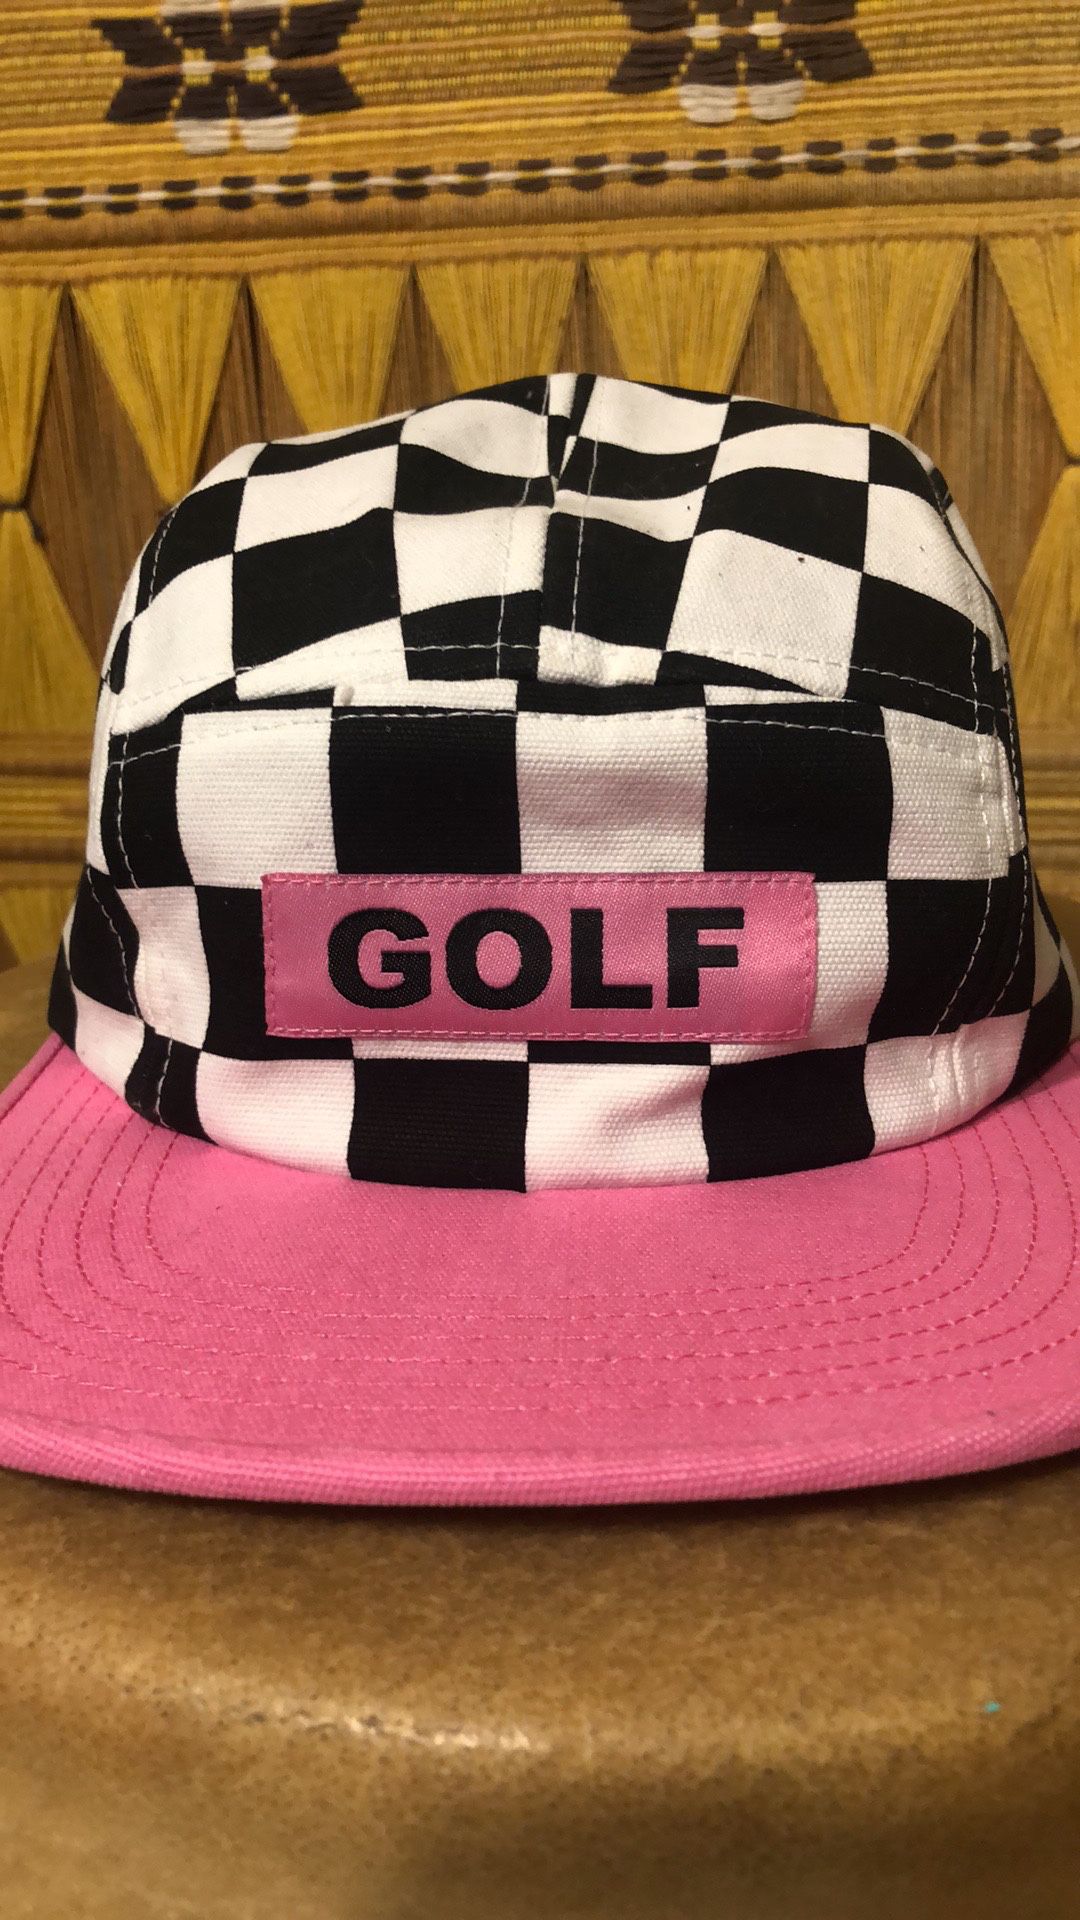 Golf Wang 5-panel hat pink checkered 2015 Tyler the creator osfm authentic cap preowned but in excellent condition and shape. 5 panel Golf Wang 2015 r